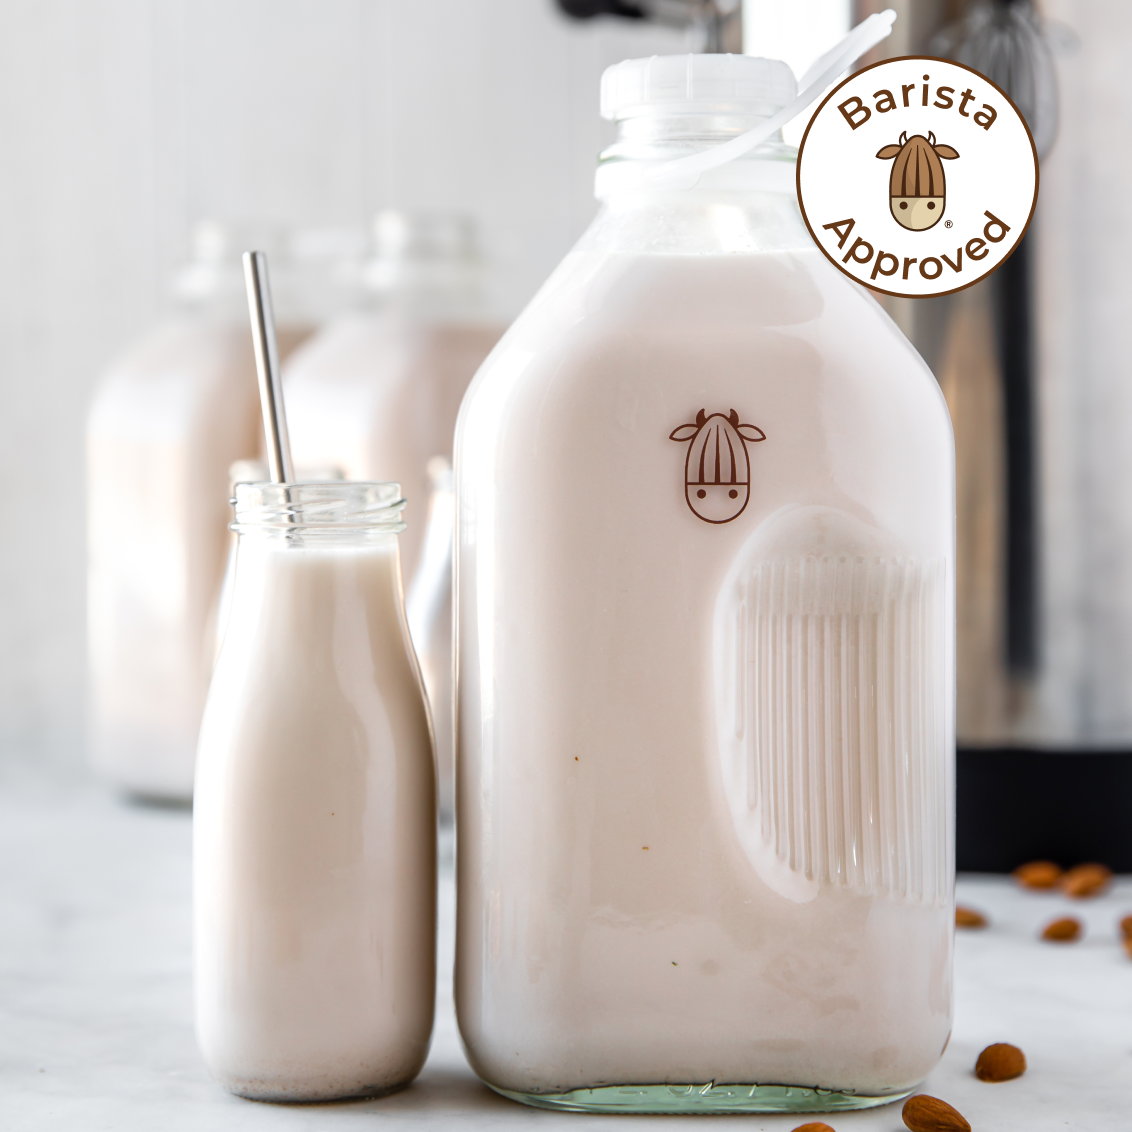 Glass jar filled with fresh Pro Unsweetened Almond Milk from Almond Cow